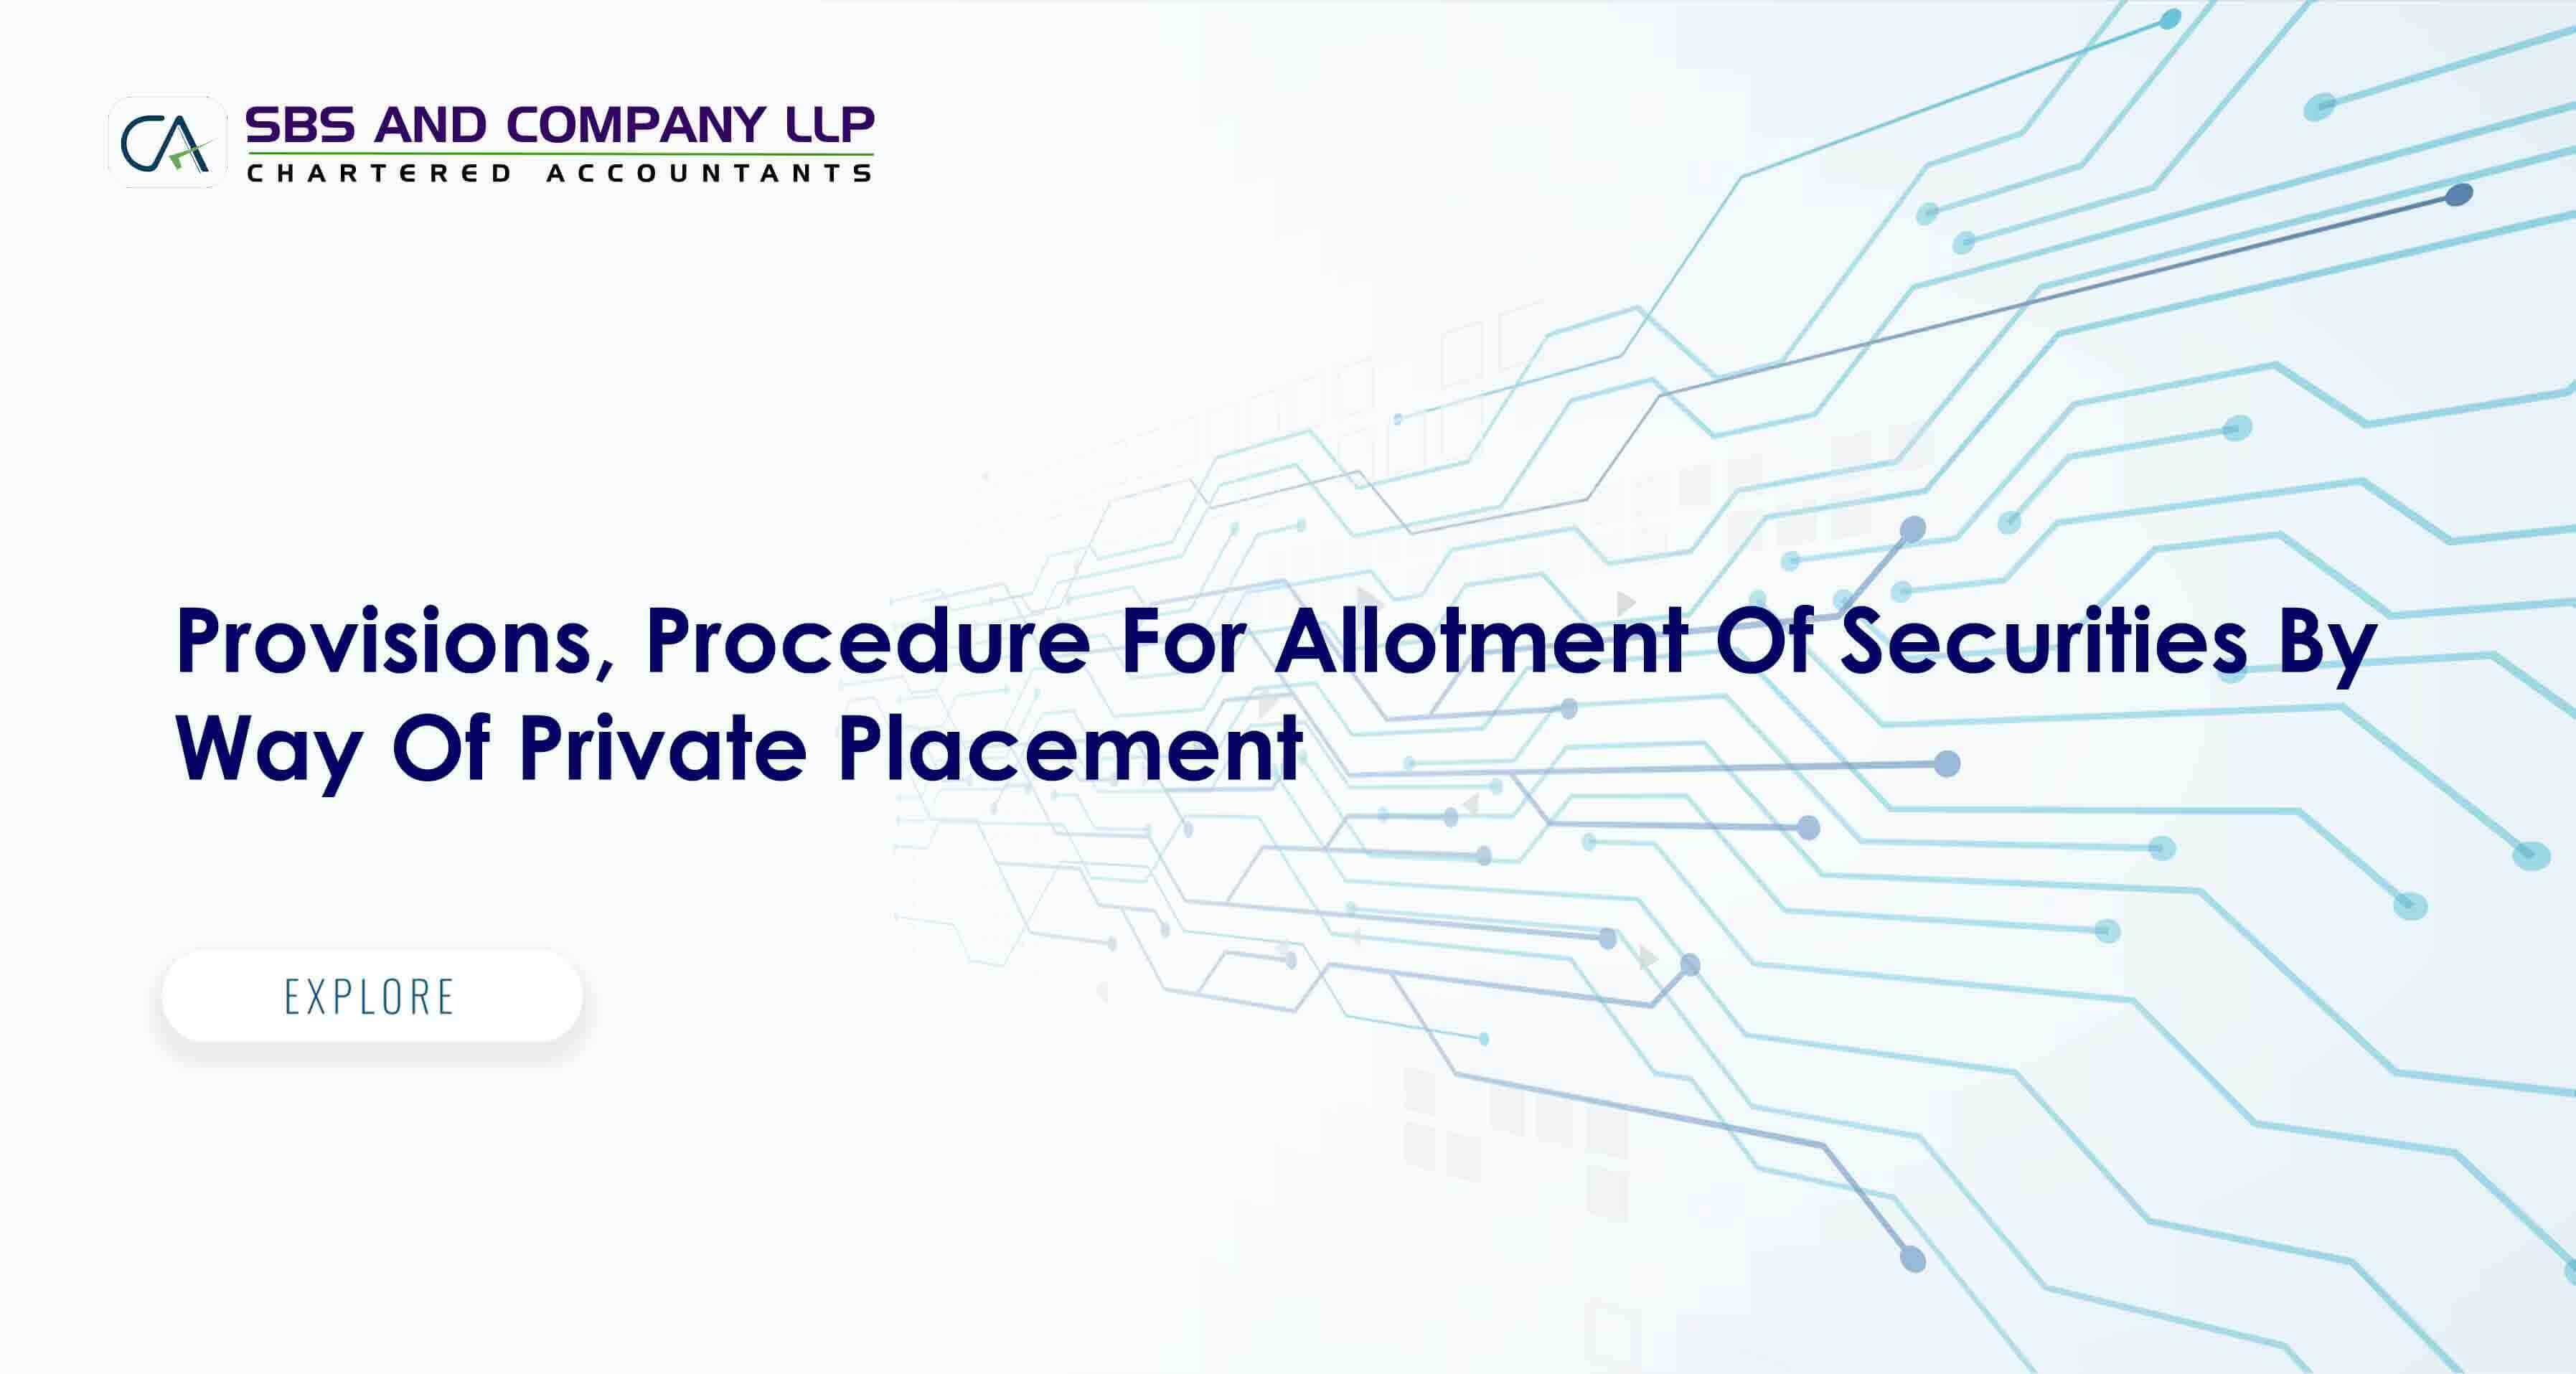 Provisions, Procedure For Allotment Of Securities By Way Of Private Placement